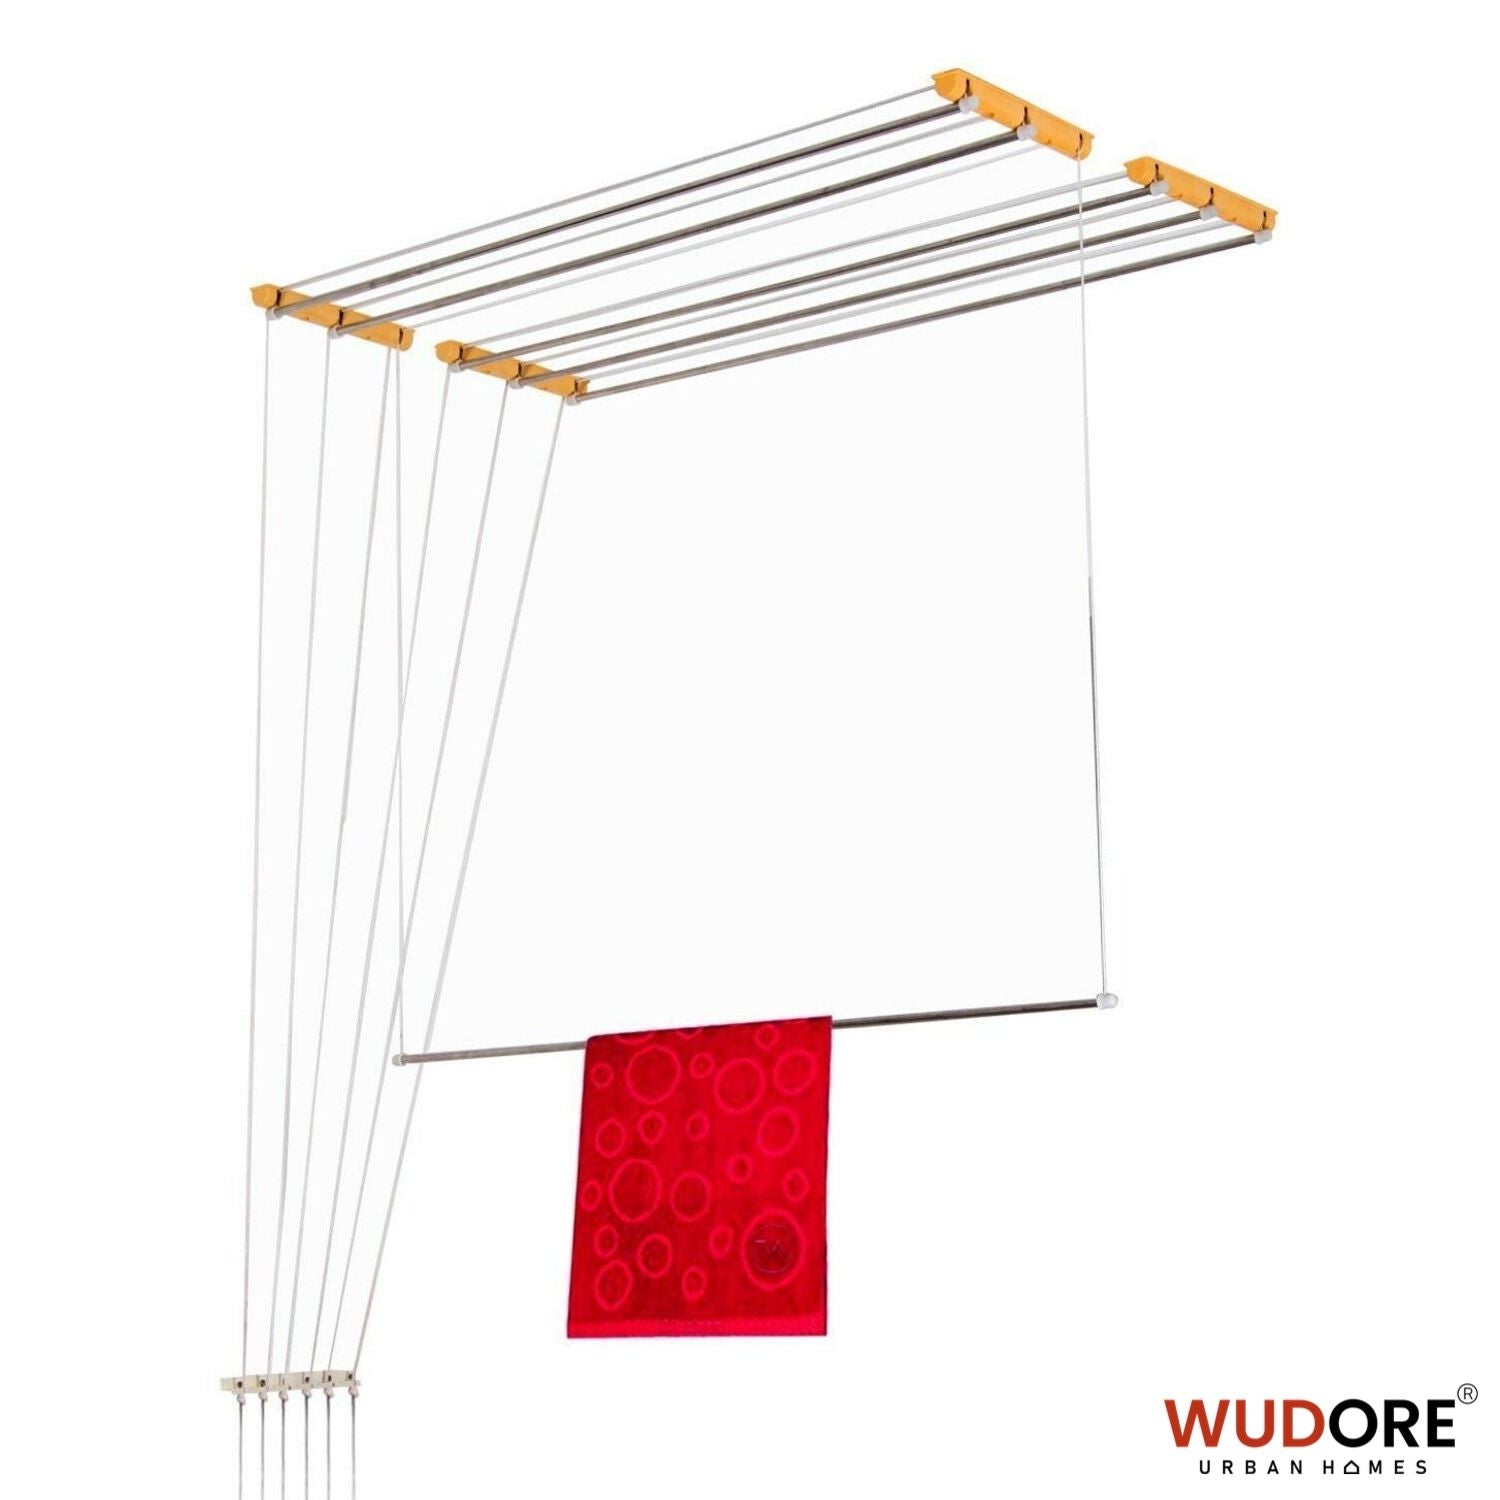 Ceiling mounted cloth dryer in 6 lines Luxury - Wudore.com